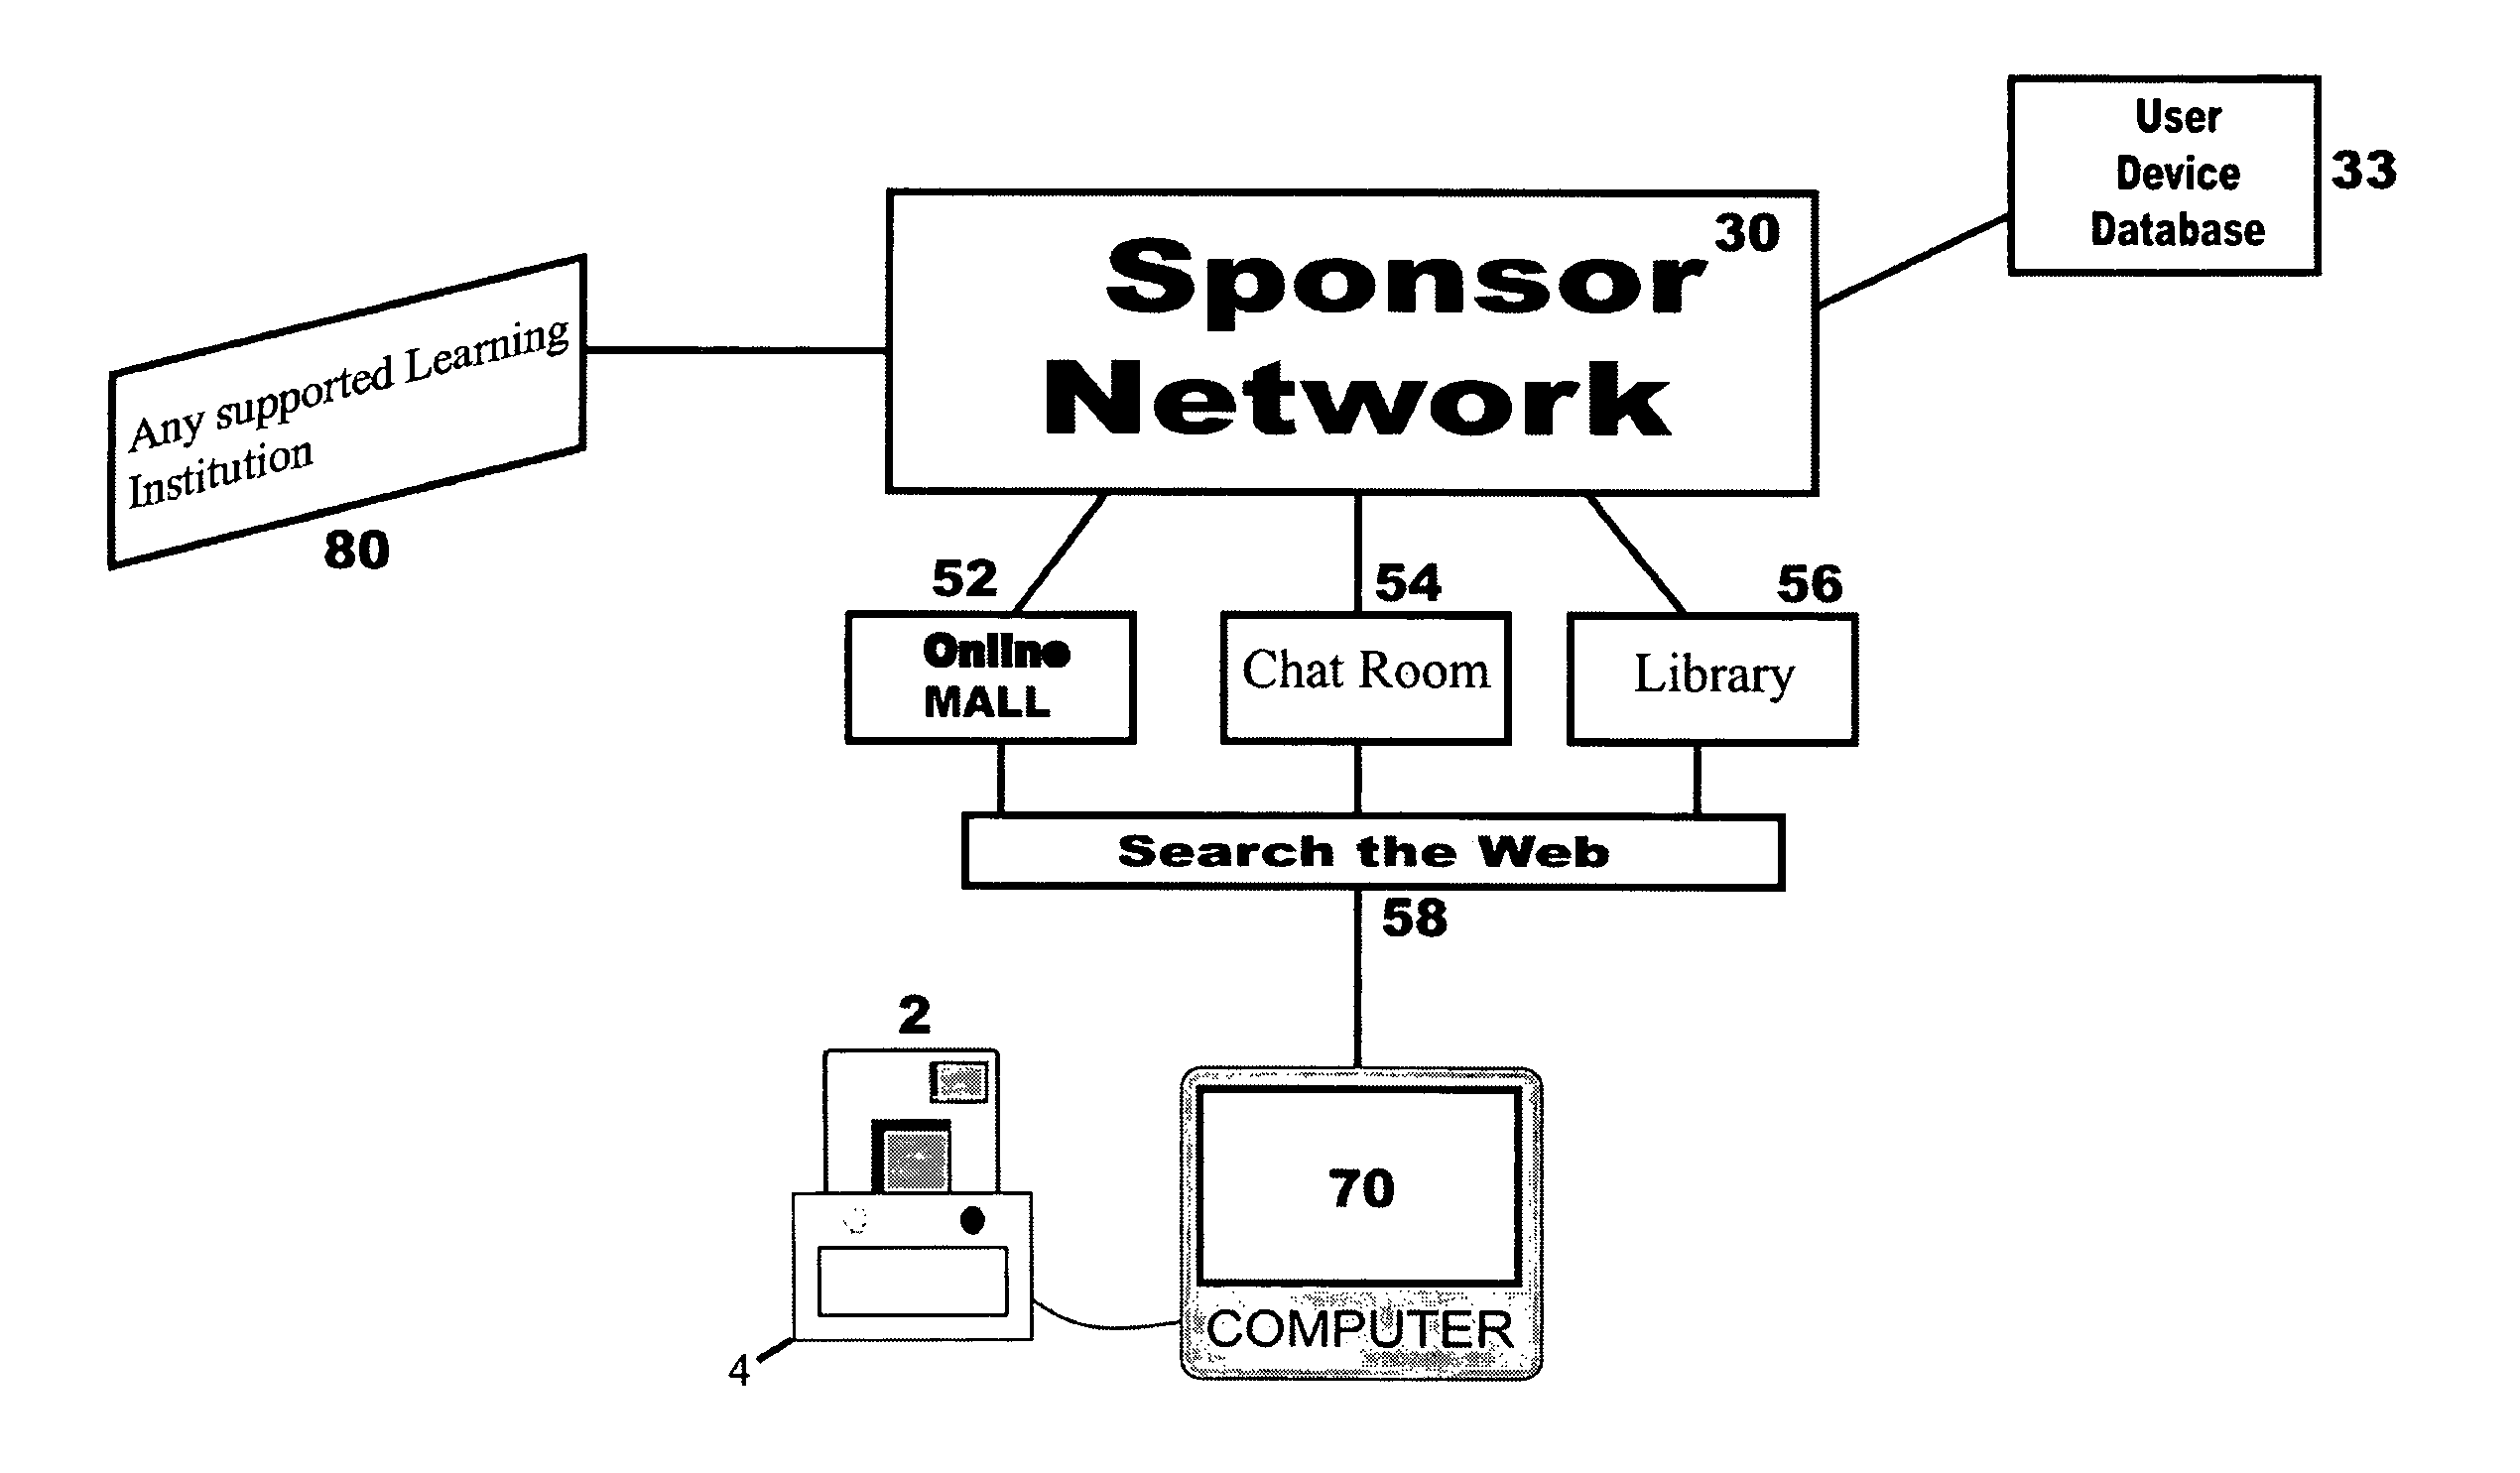 System for secure internet access for children